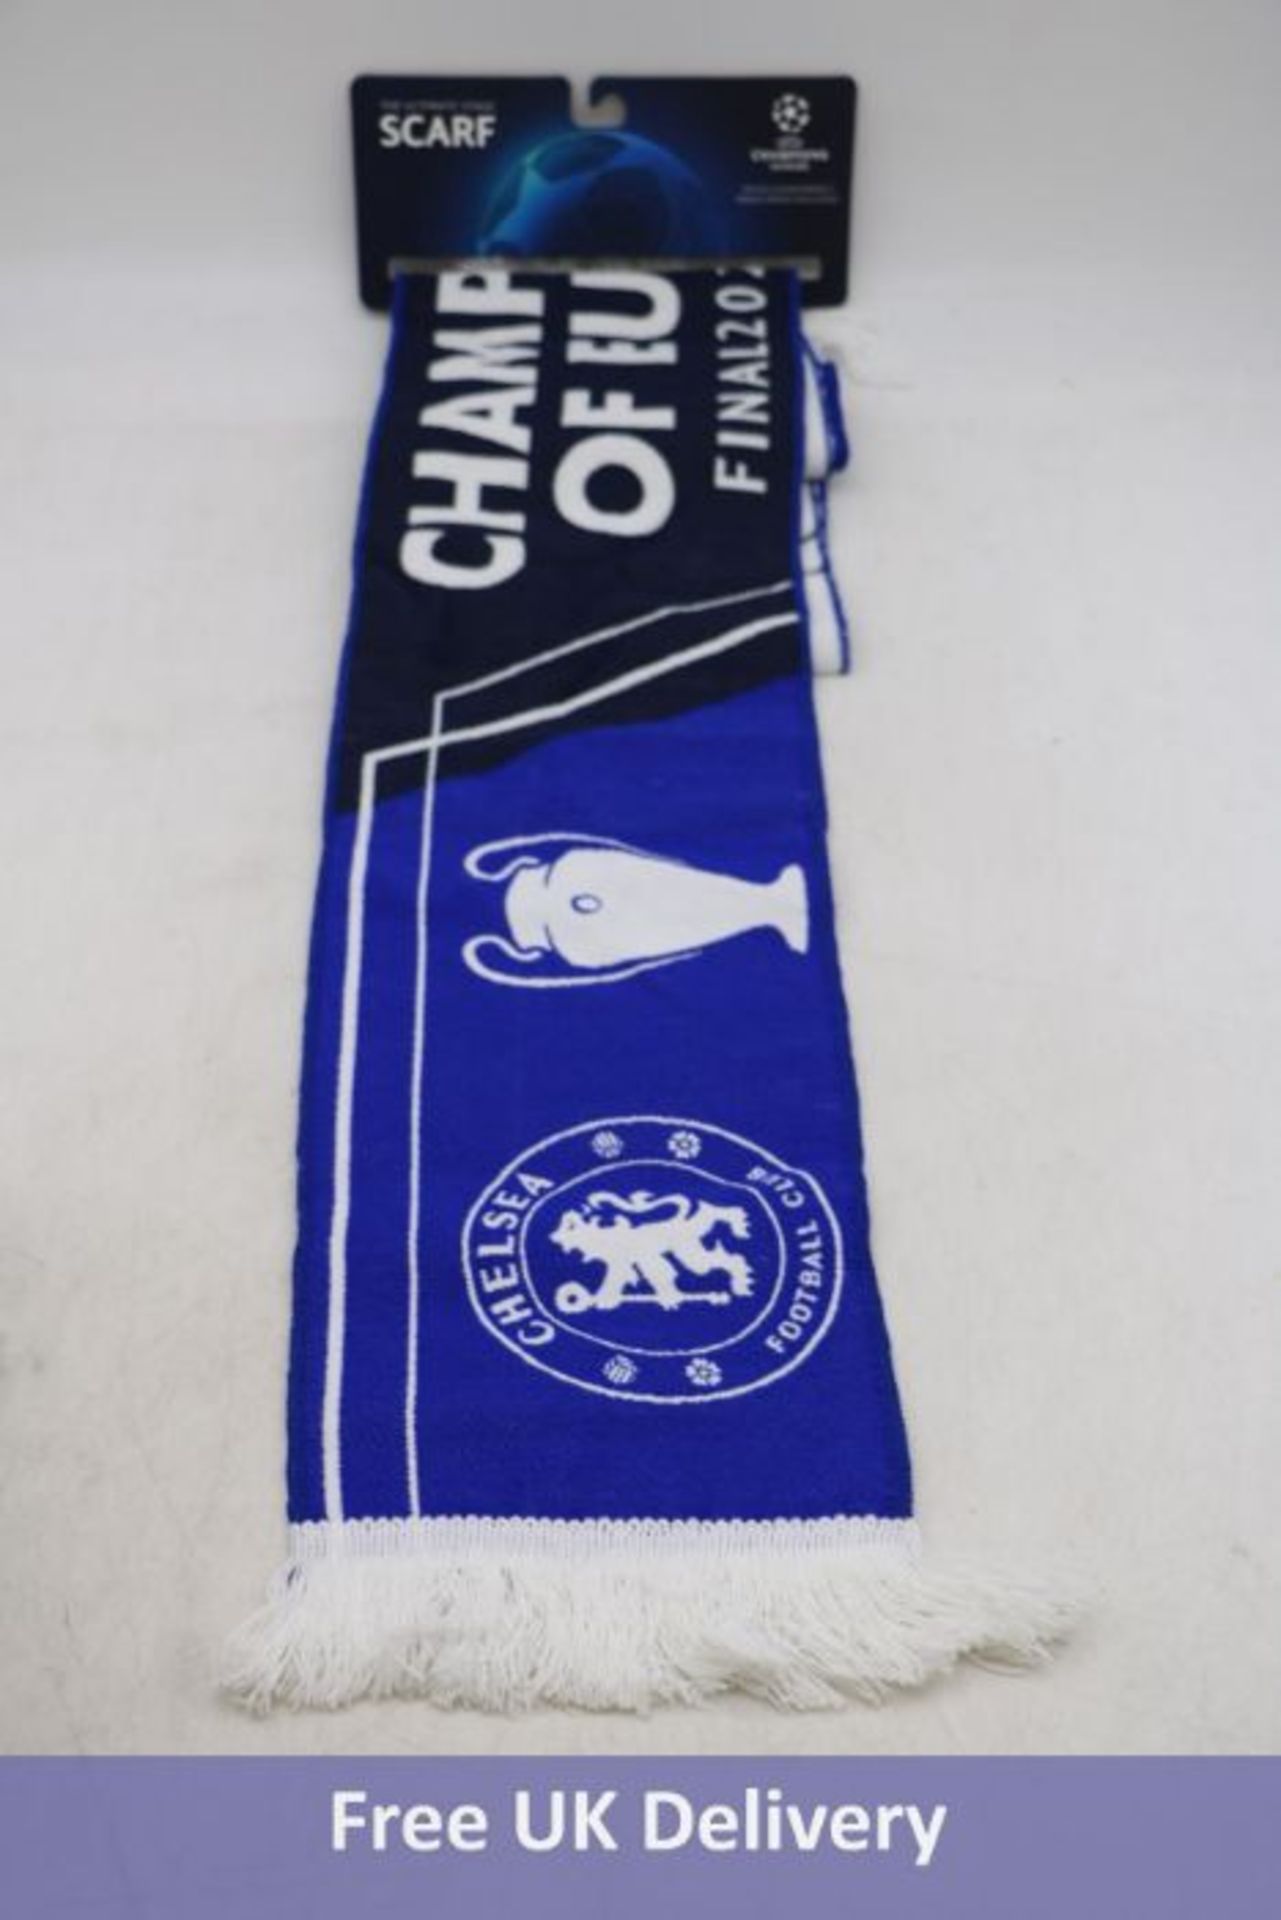 Ten Chelsea Champions League Final 2021 Official Licensed Scarves, Blue, One Size